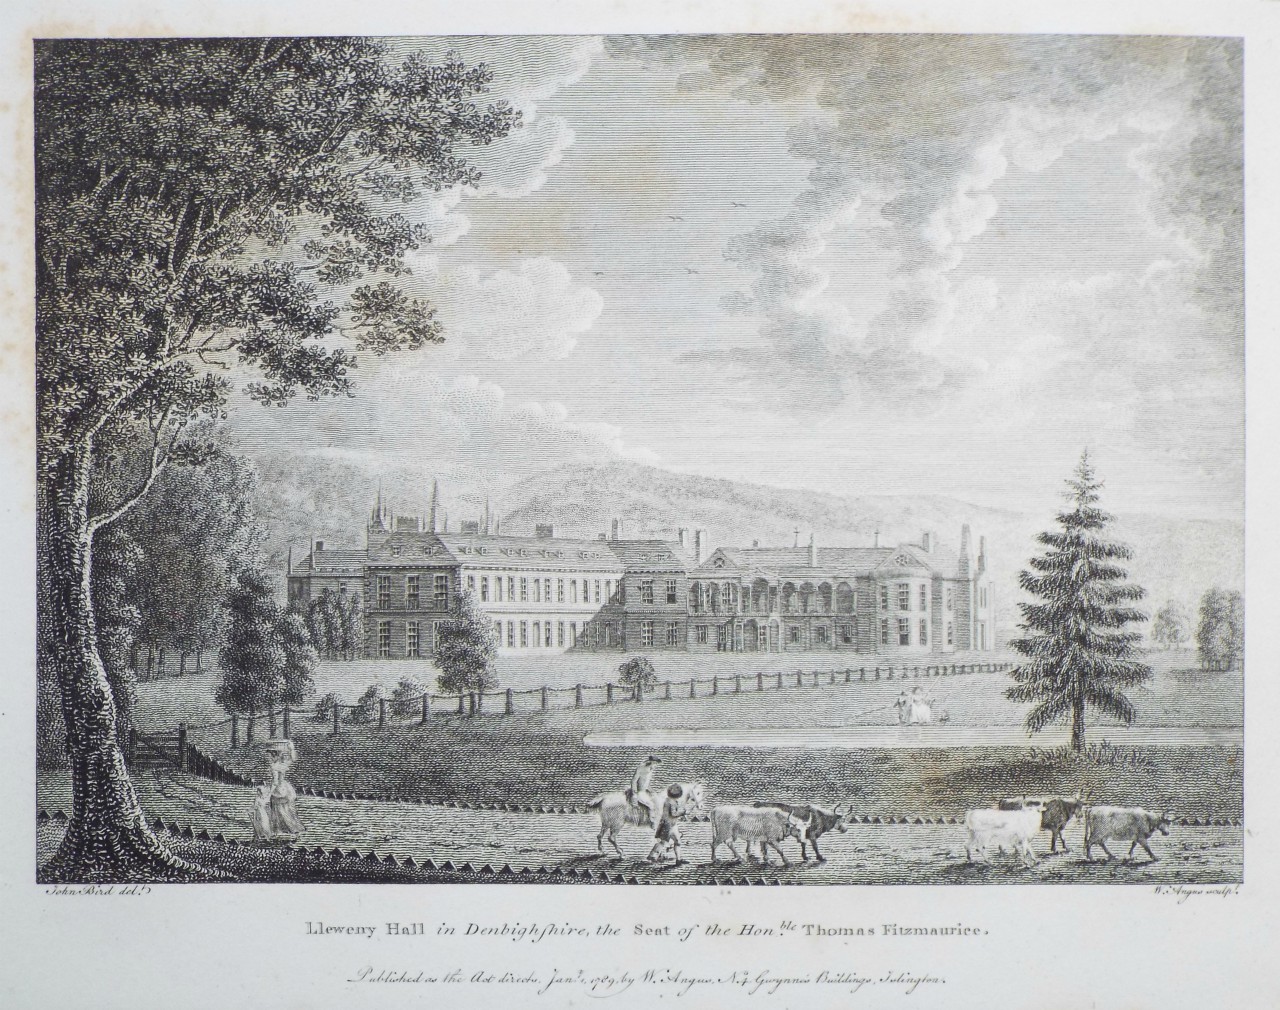 Print - Lleweny Hall in Denbighshire, the Seat of the Honble. Thomas Fitzmaurice. - Angus